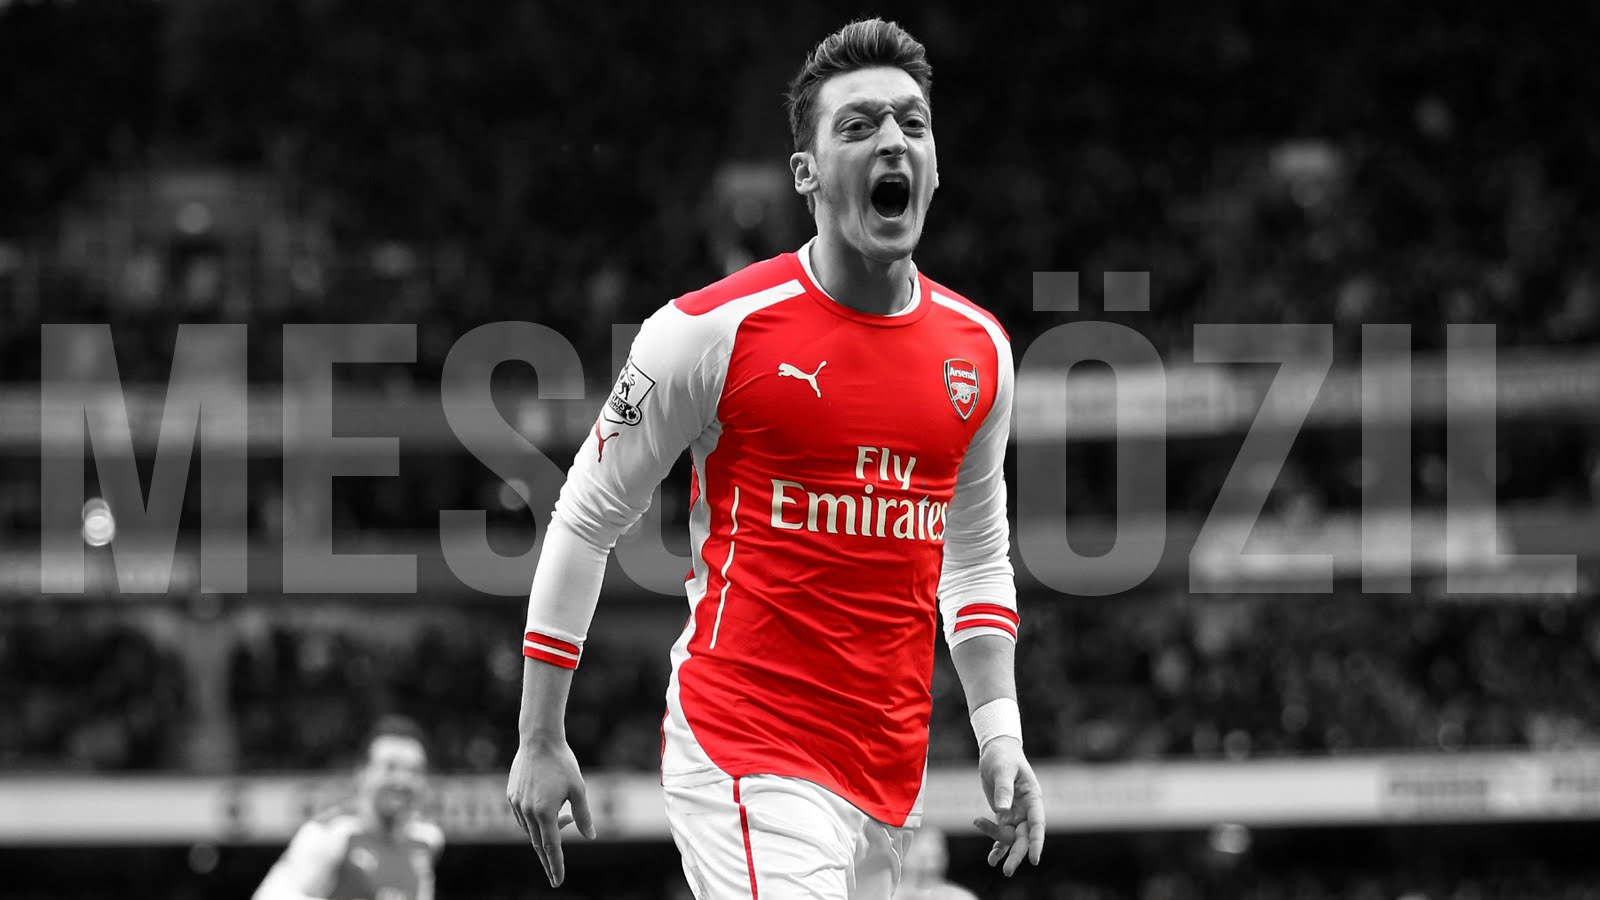 Mesut Ozil Wallpaper High Resolution And Quality